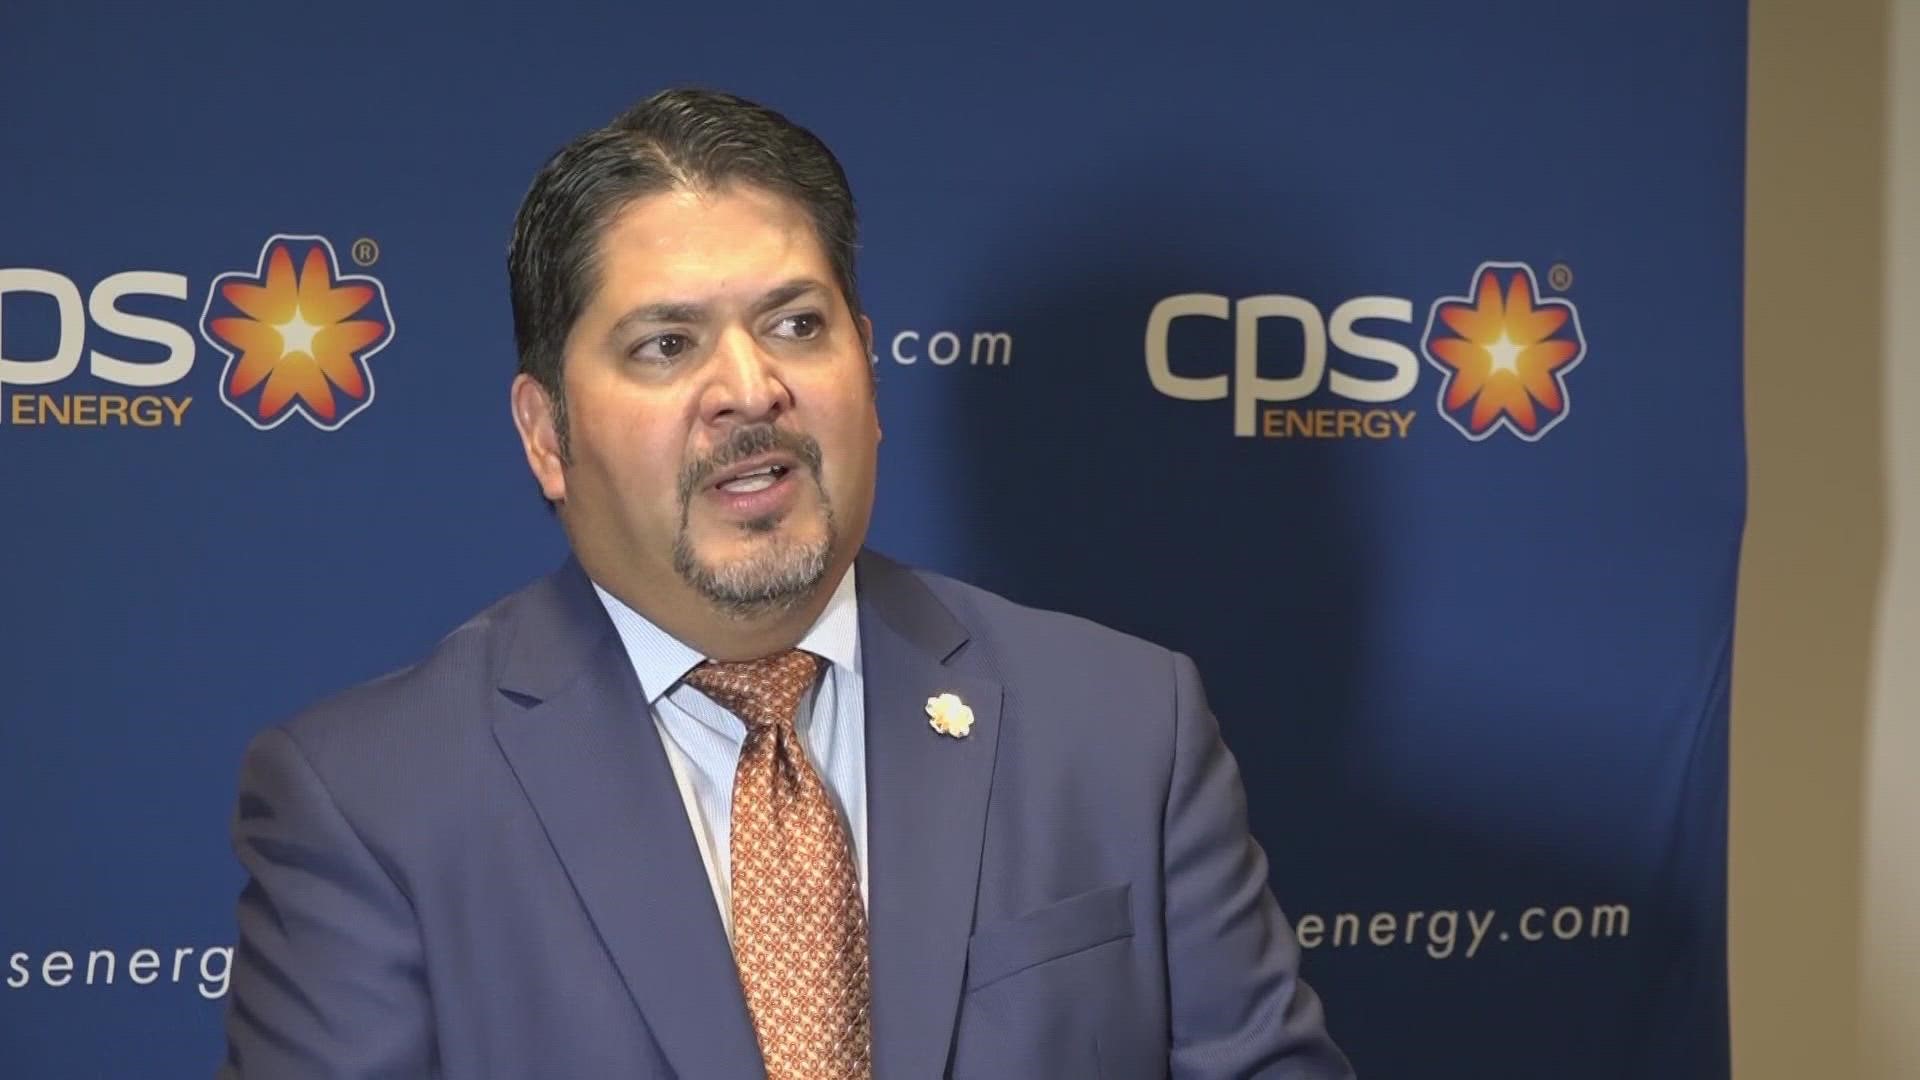 CPS Energy has a new president and CEO and it's a familiar face.